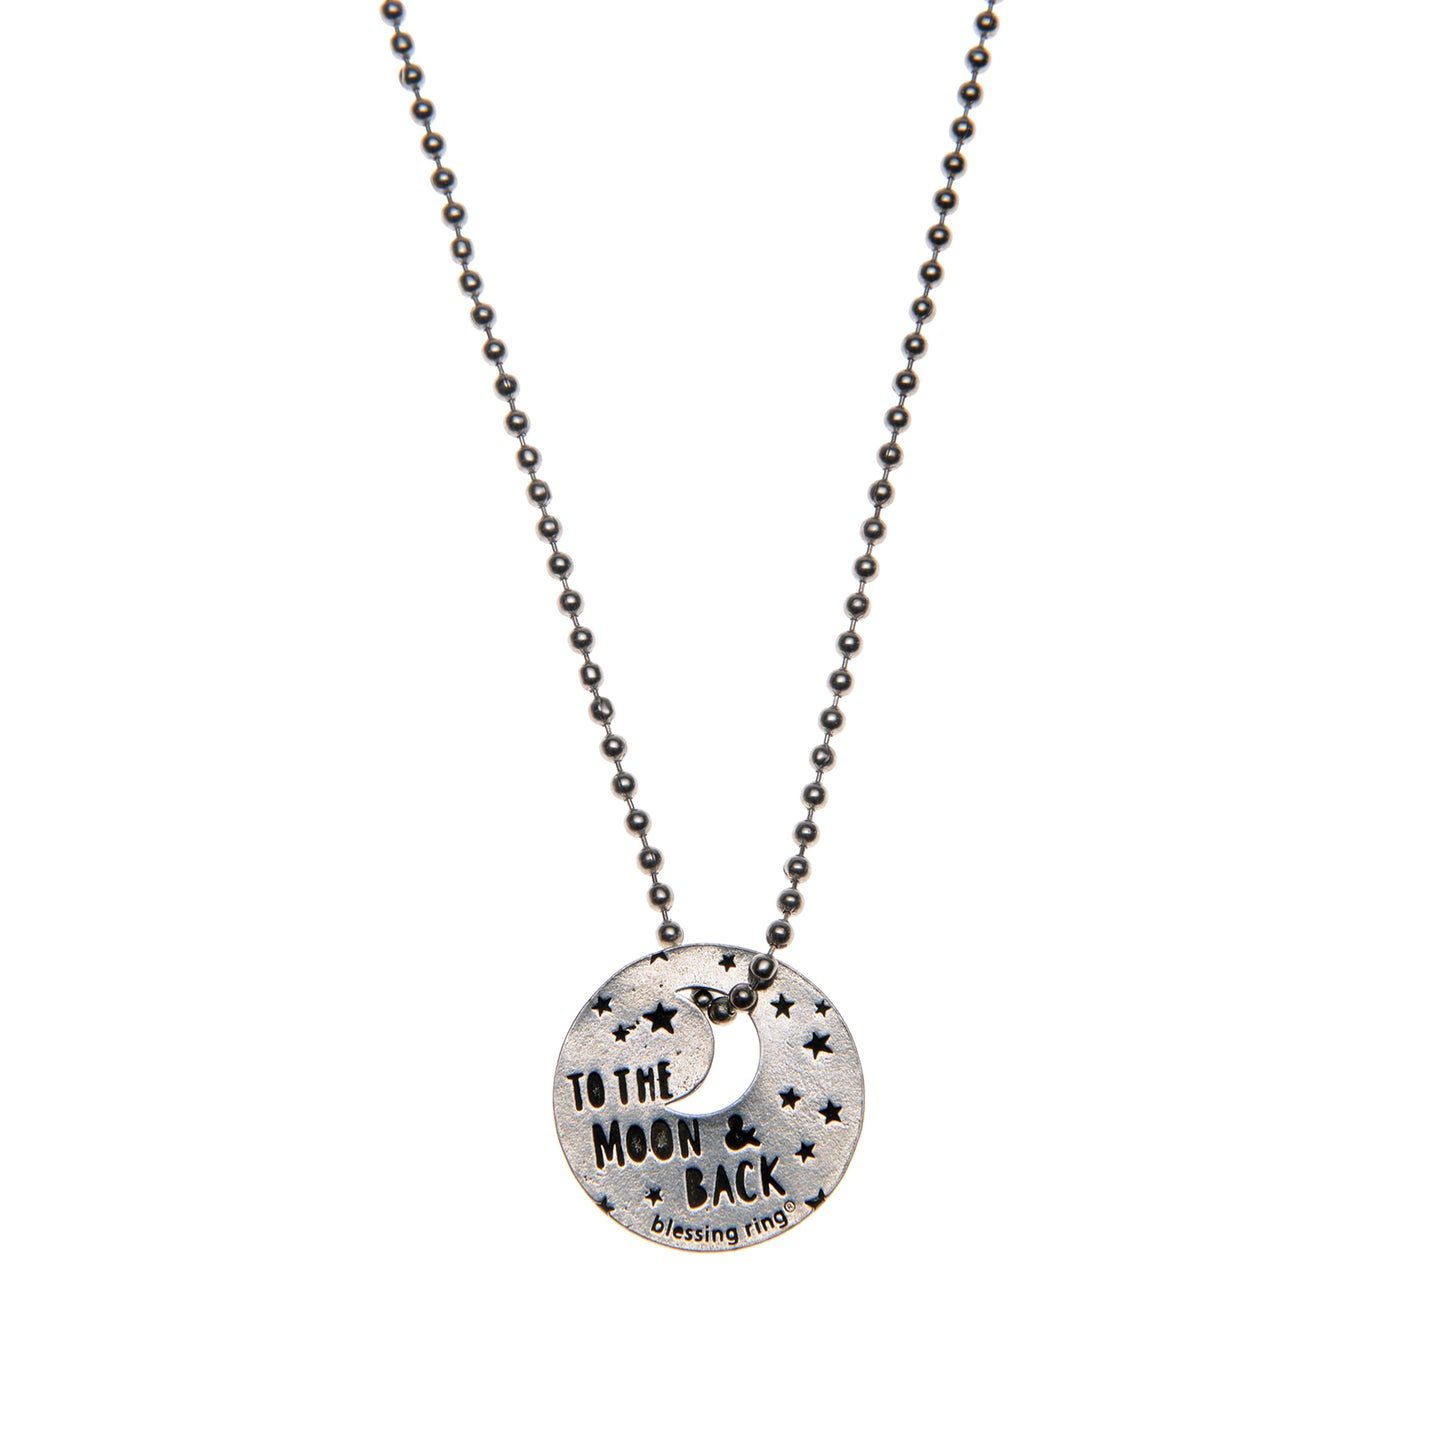 Ball Chain Necklace - Loose